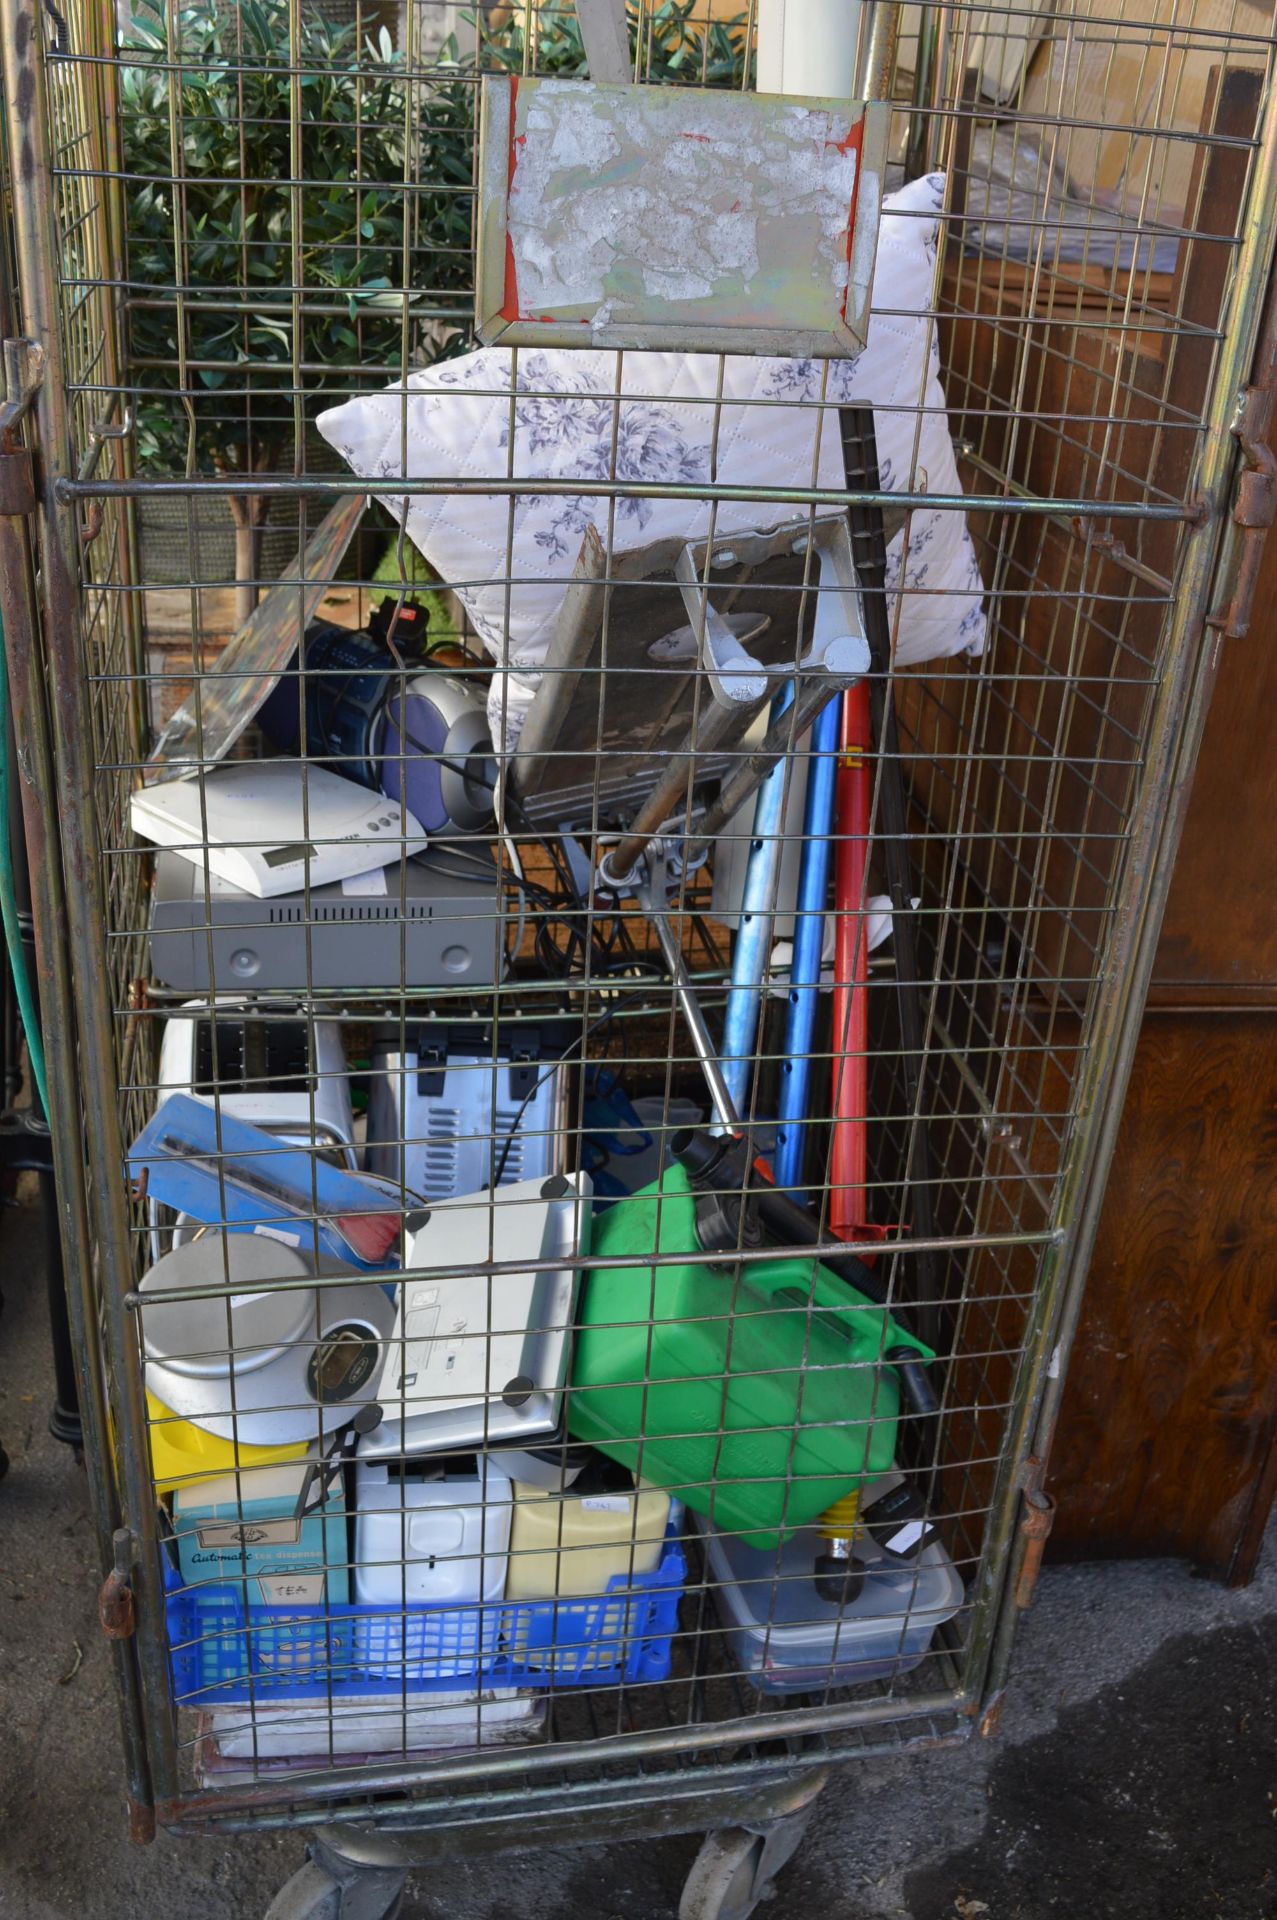 Cage of Household Goods; Toaster, Tile Cutter, Pog